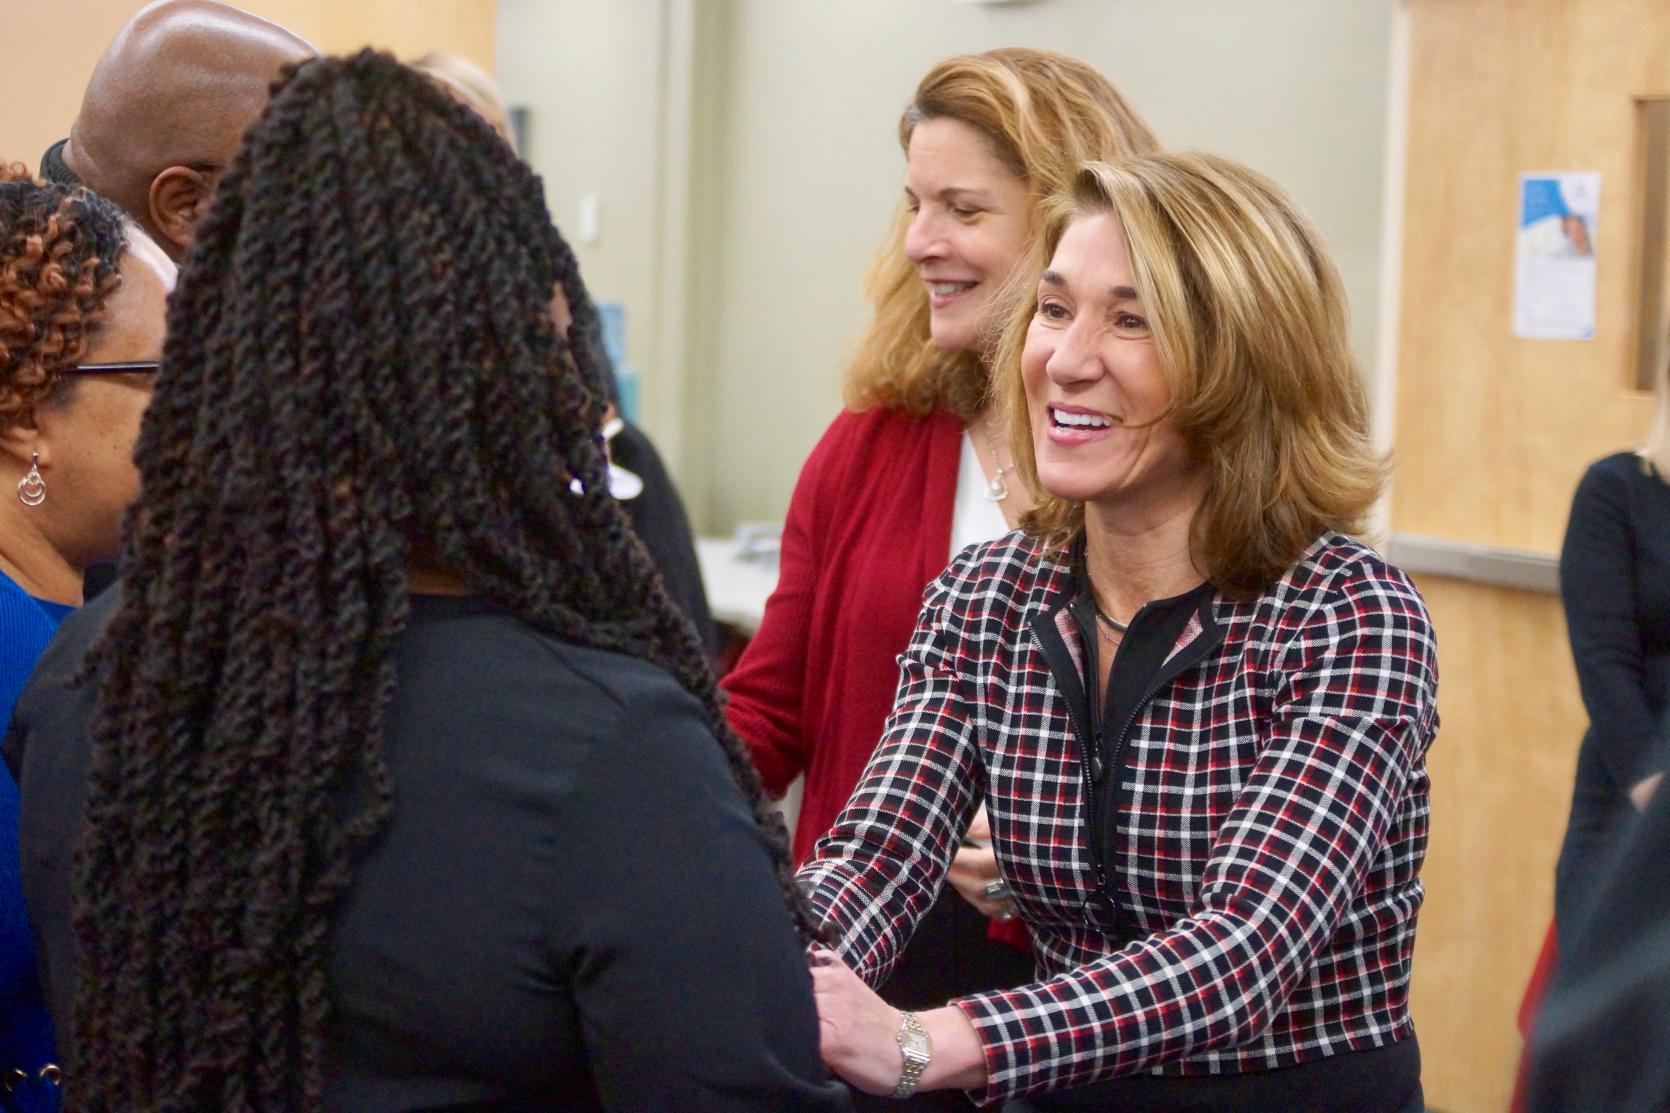 Lt. Governor Karyn Polito with others